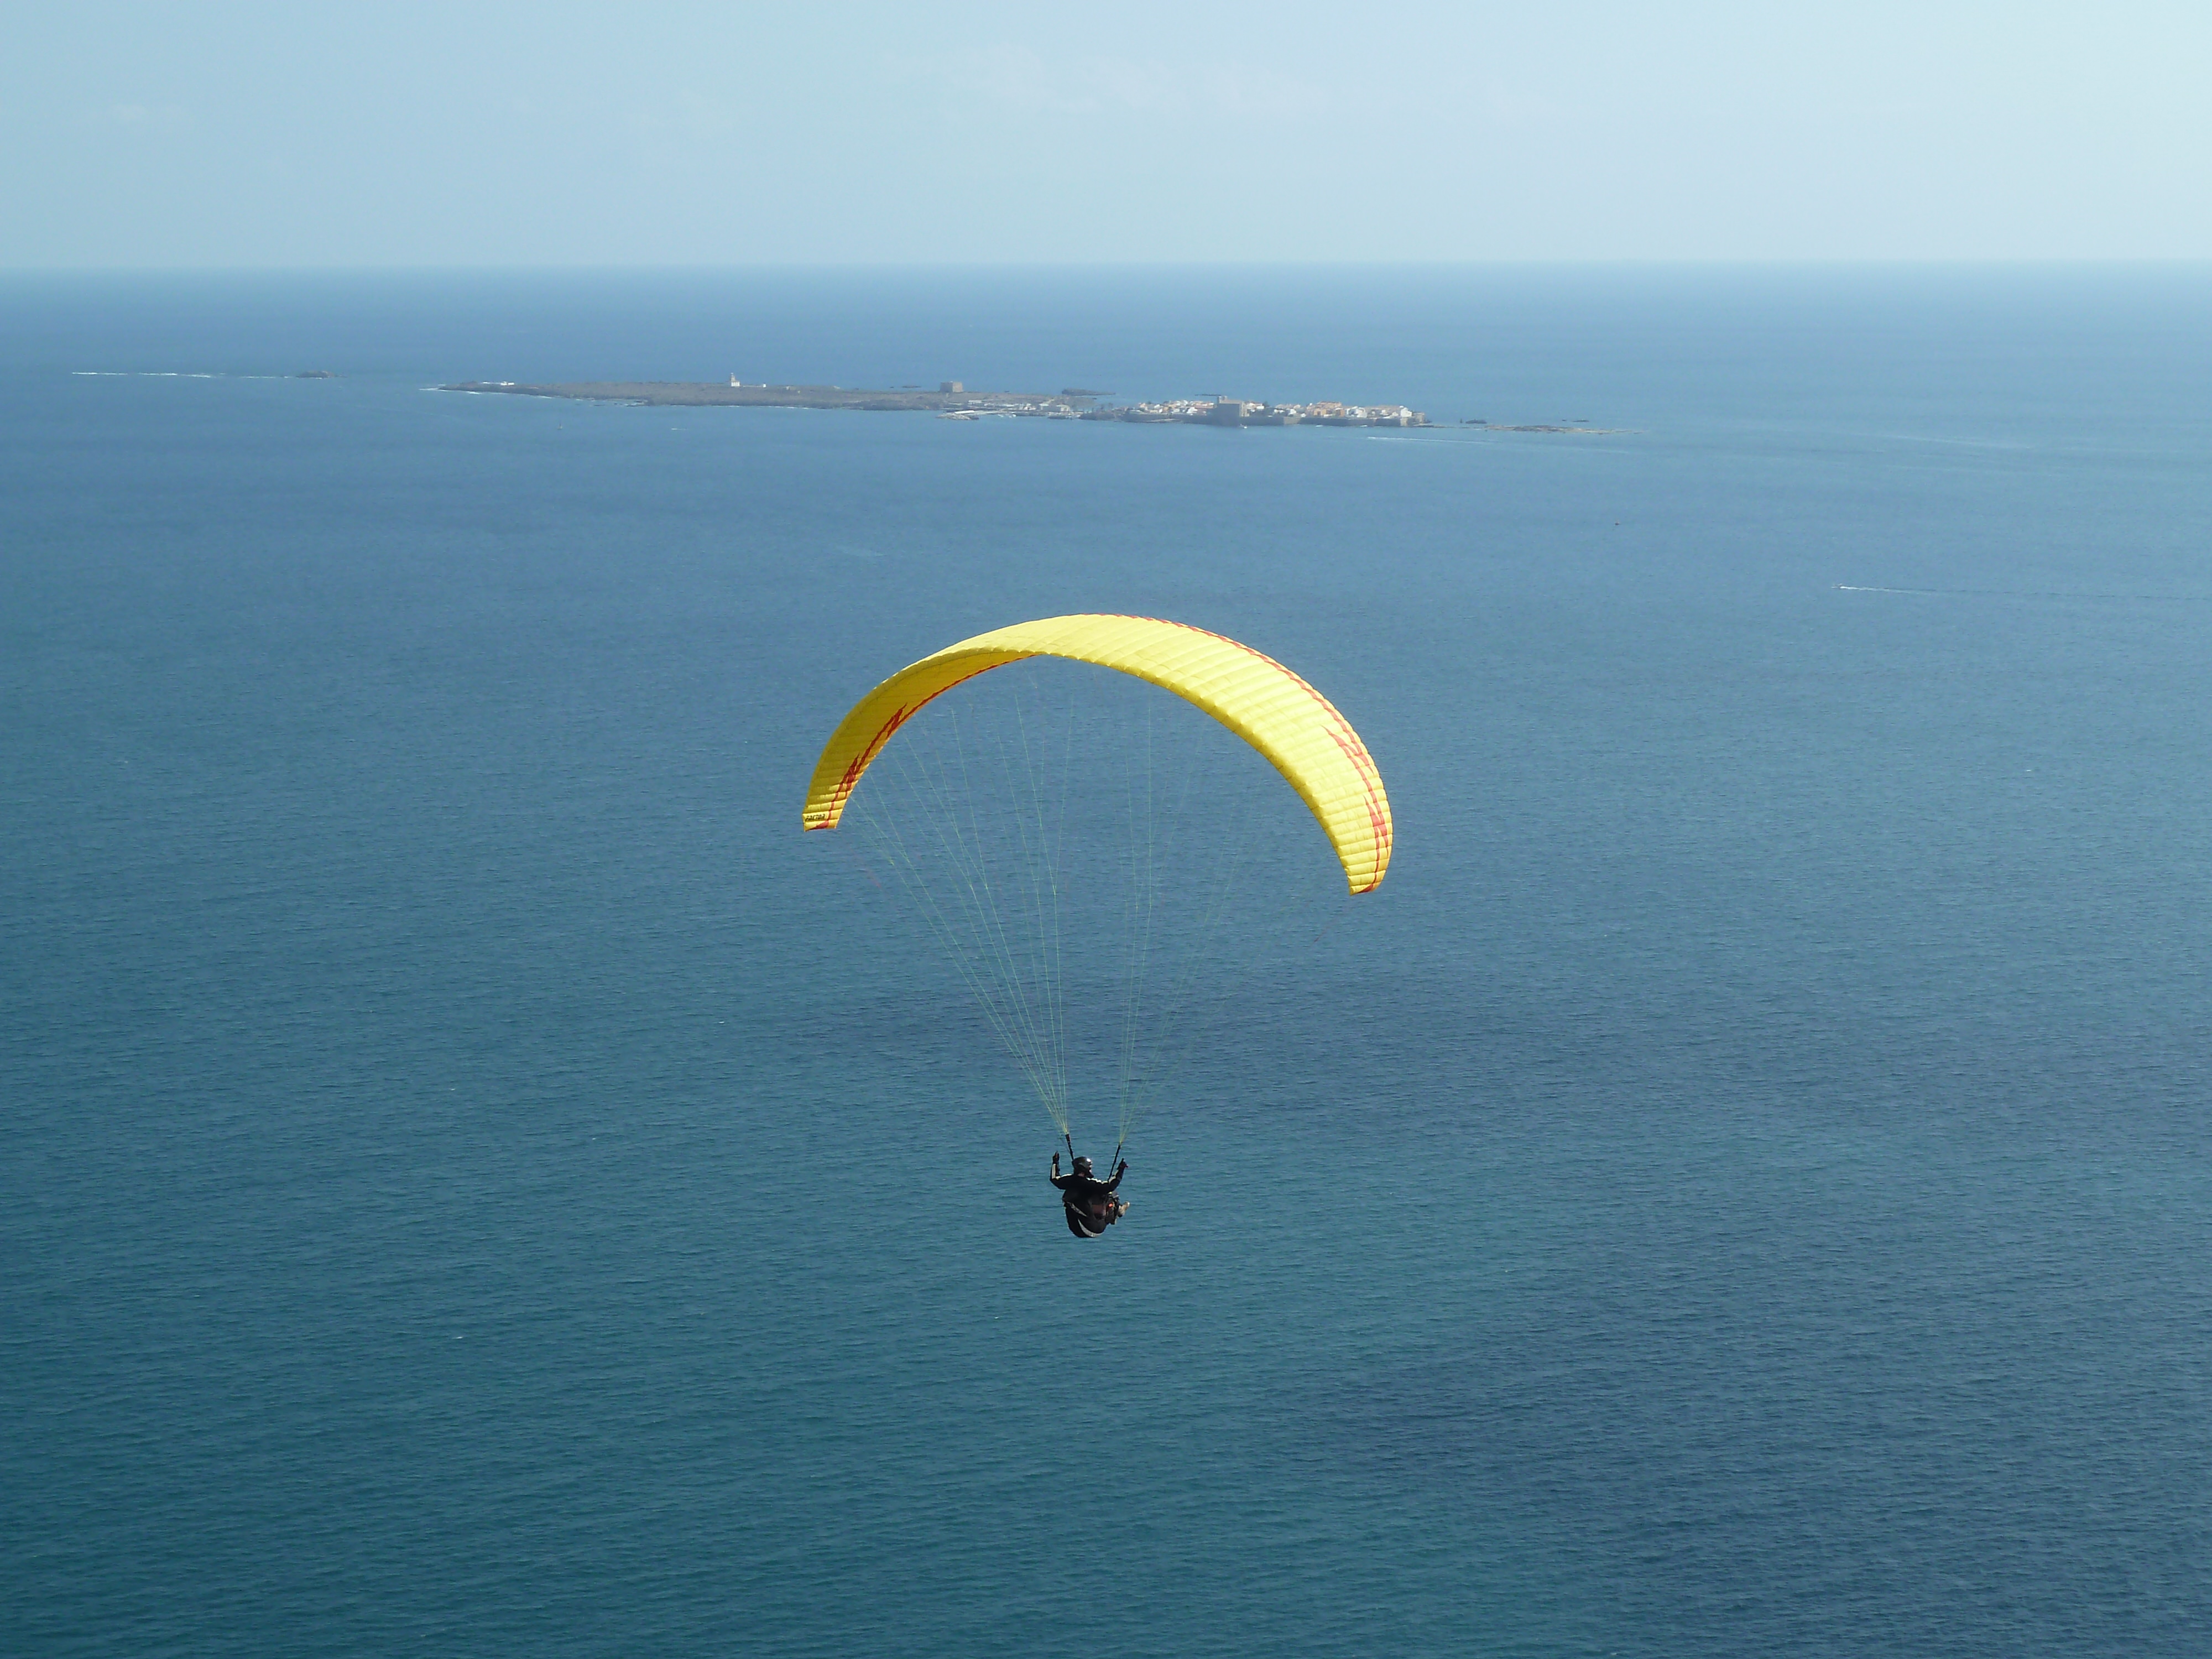 Brüggemann paragliding during a vacation in Spain, close to Alicante.